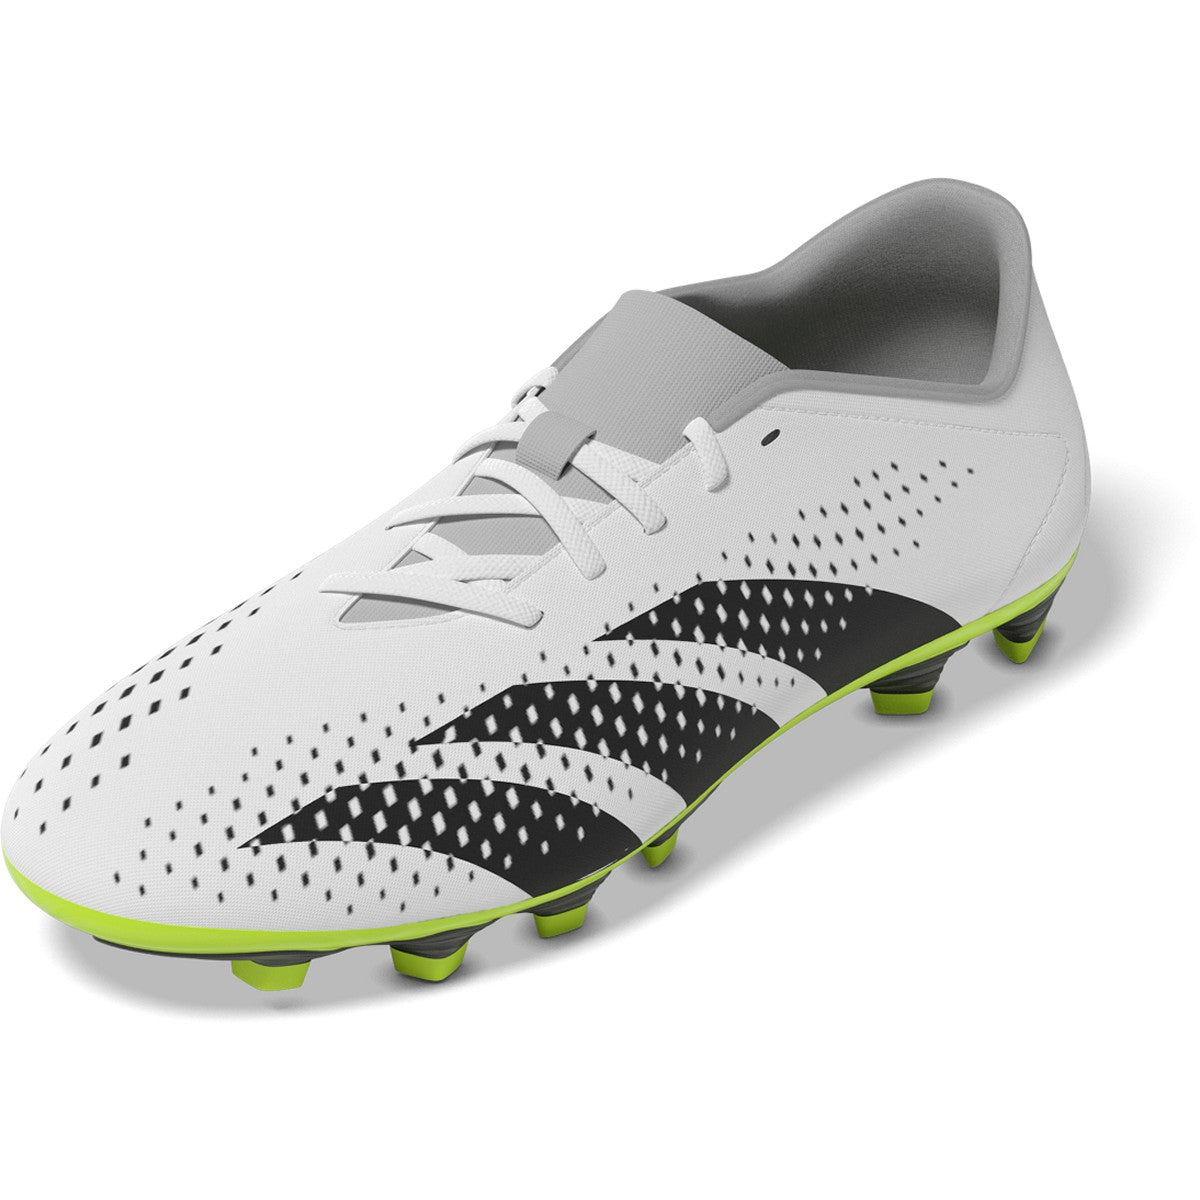 IE9434 Whit Cloud Juniors Predator Cleats Zone – adidas Soccer Accuracy.4 FxG Soccer